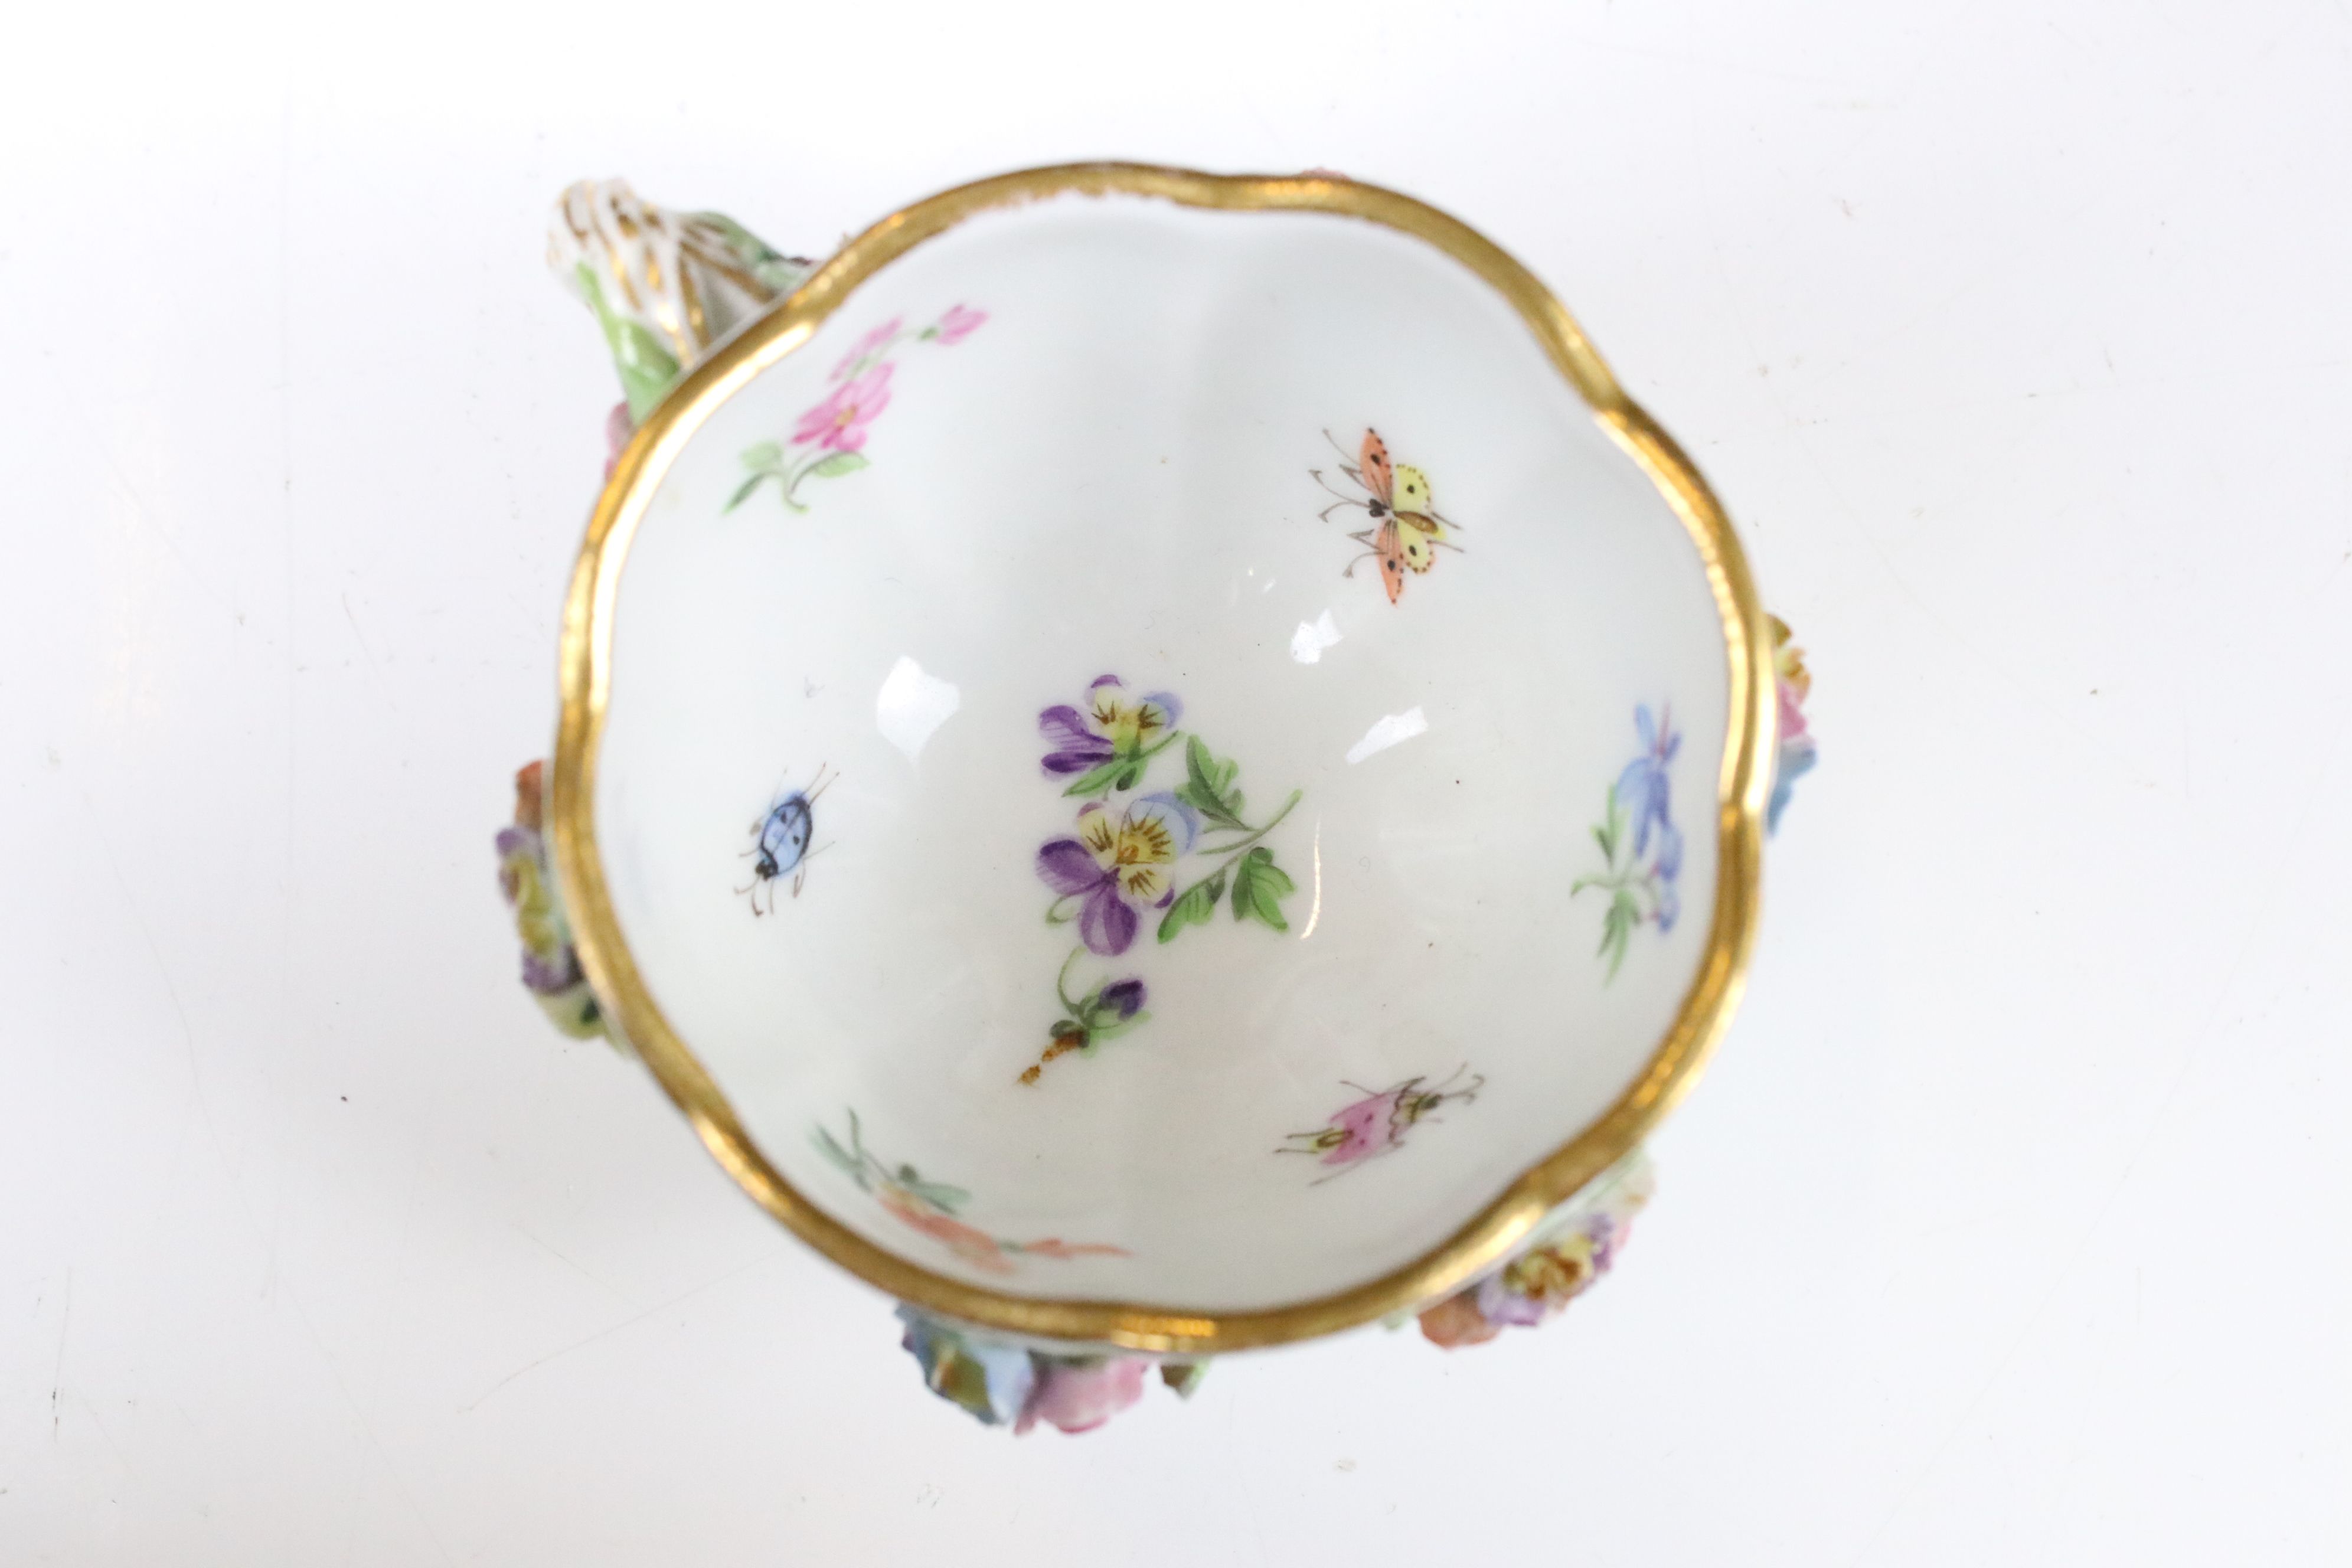 Meissen floral encrusted cup and saucer, decorated with insects and flowers - Image 7 of 8